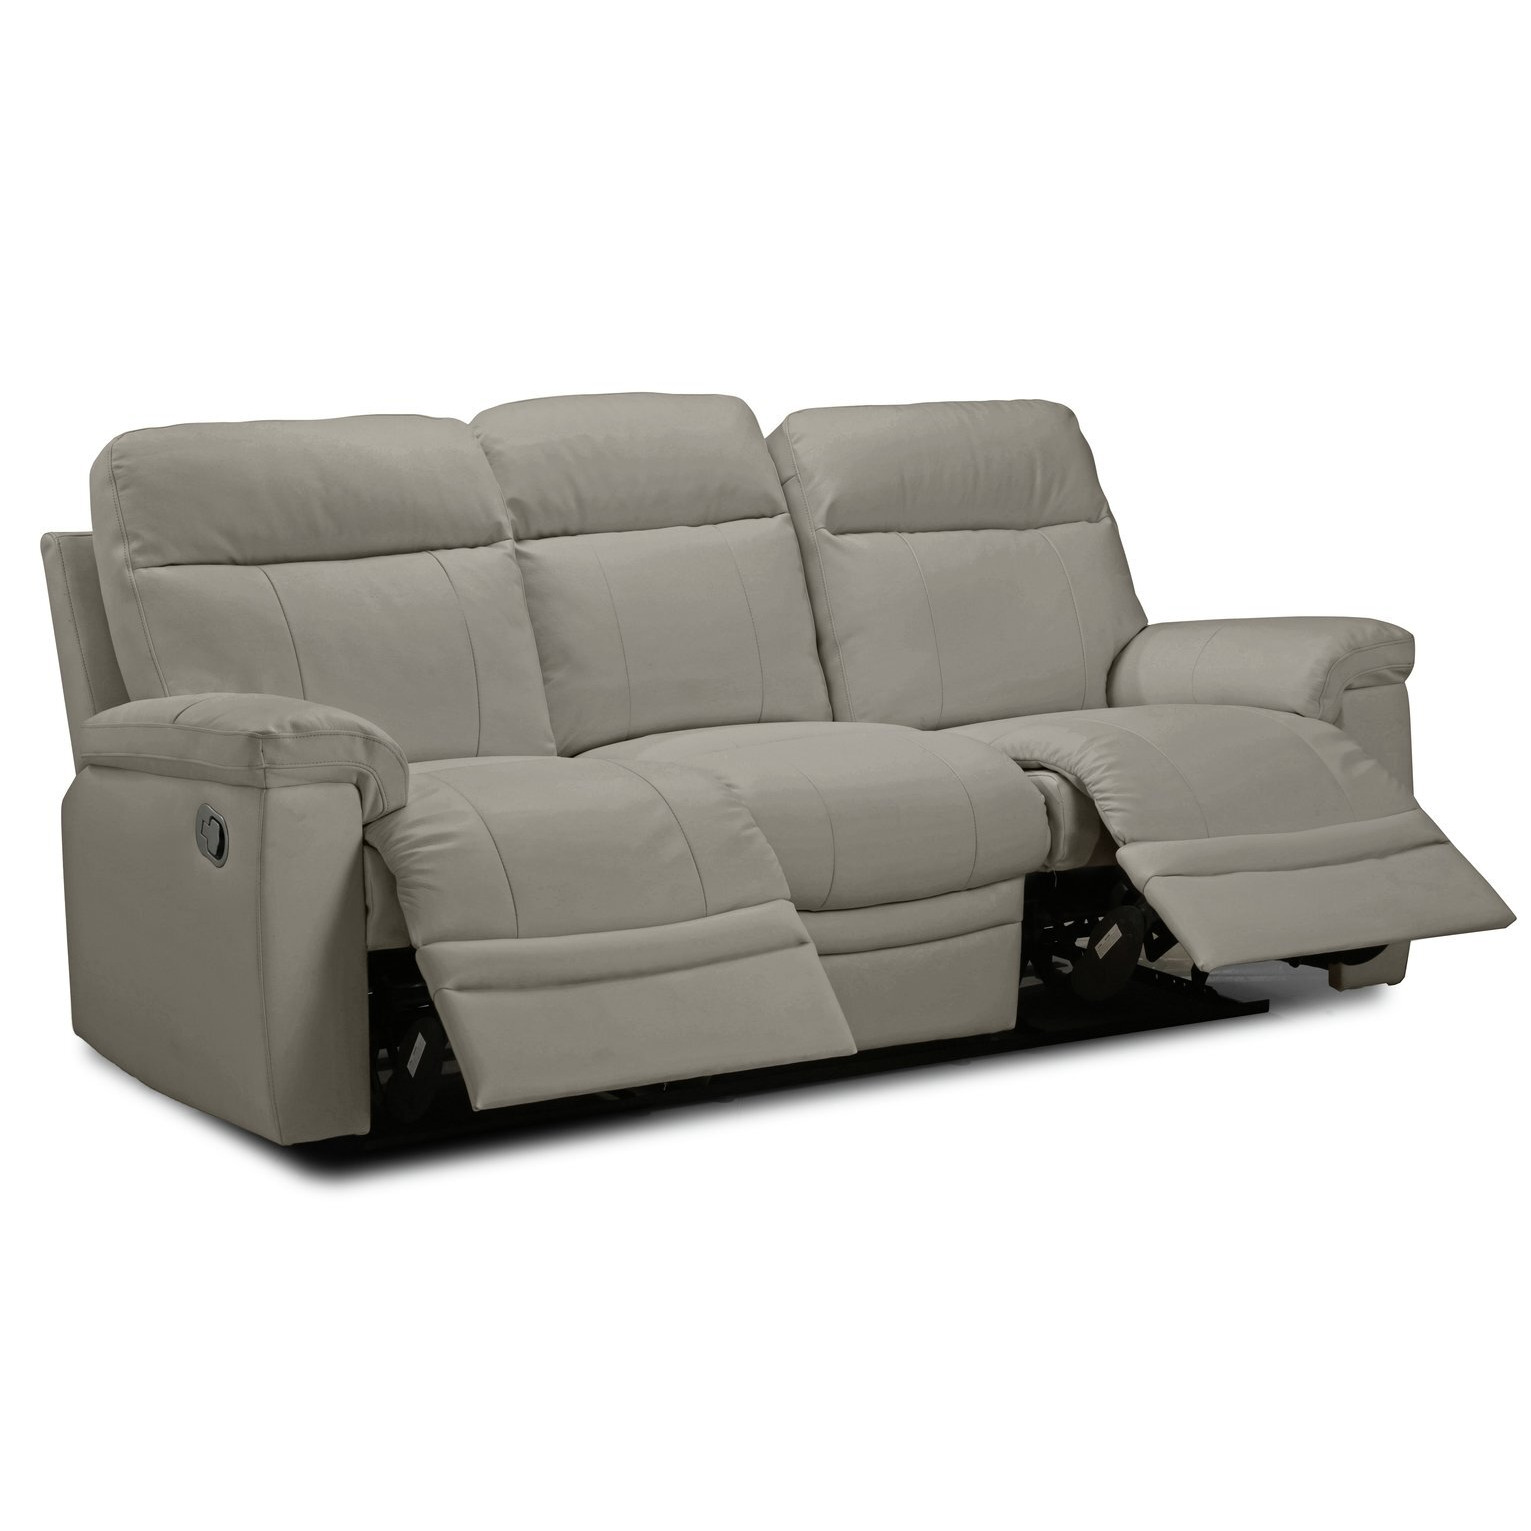 Argos Home New Paolo 3 Seater Manual Recliner Sofa - Grey - image 1